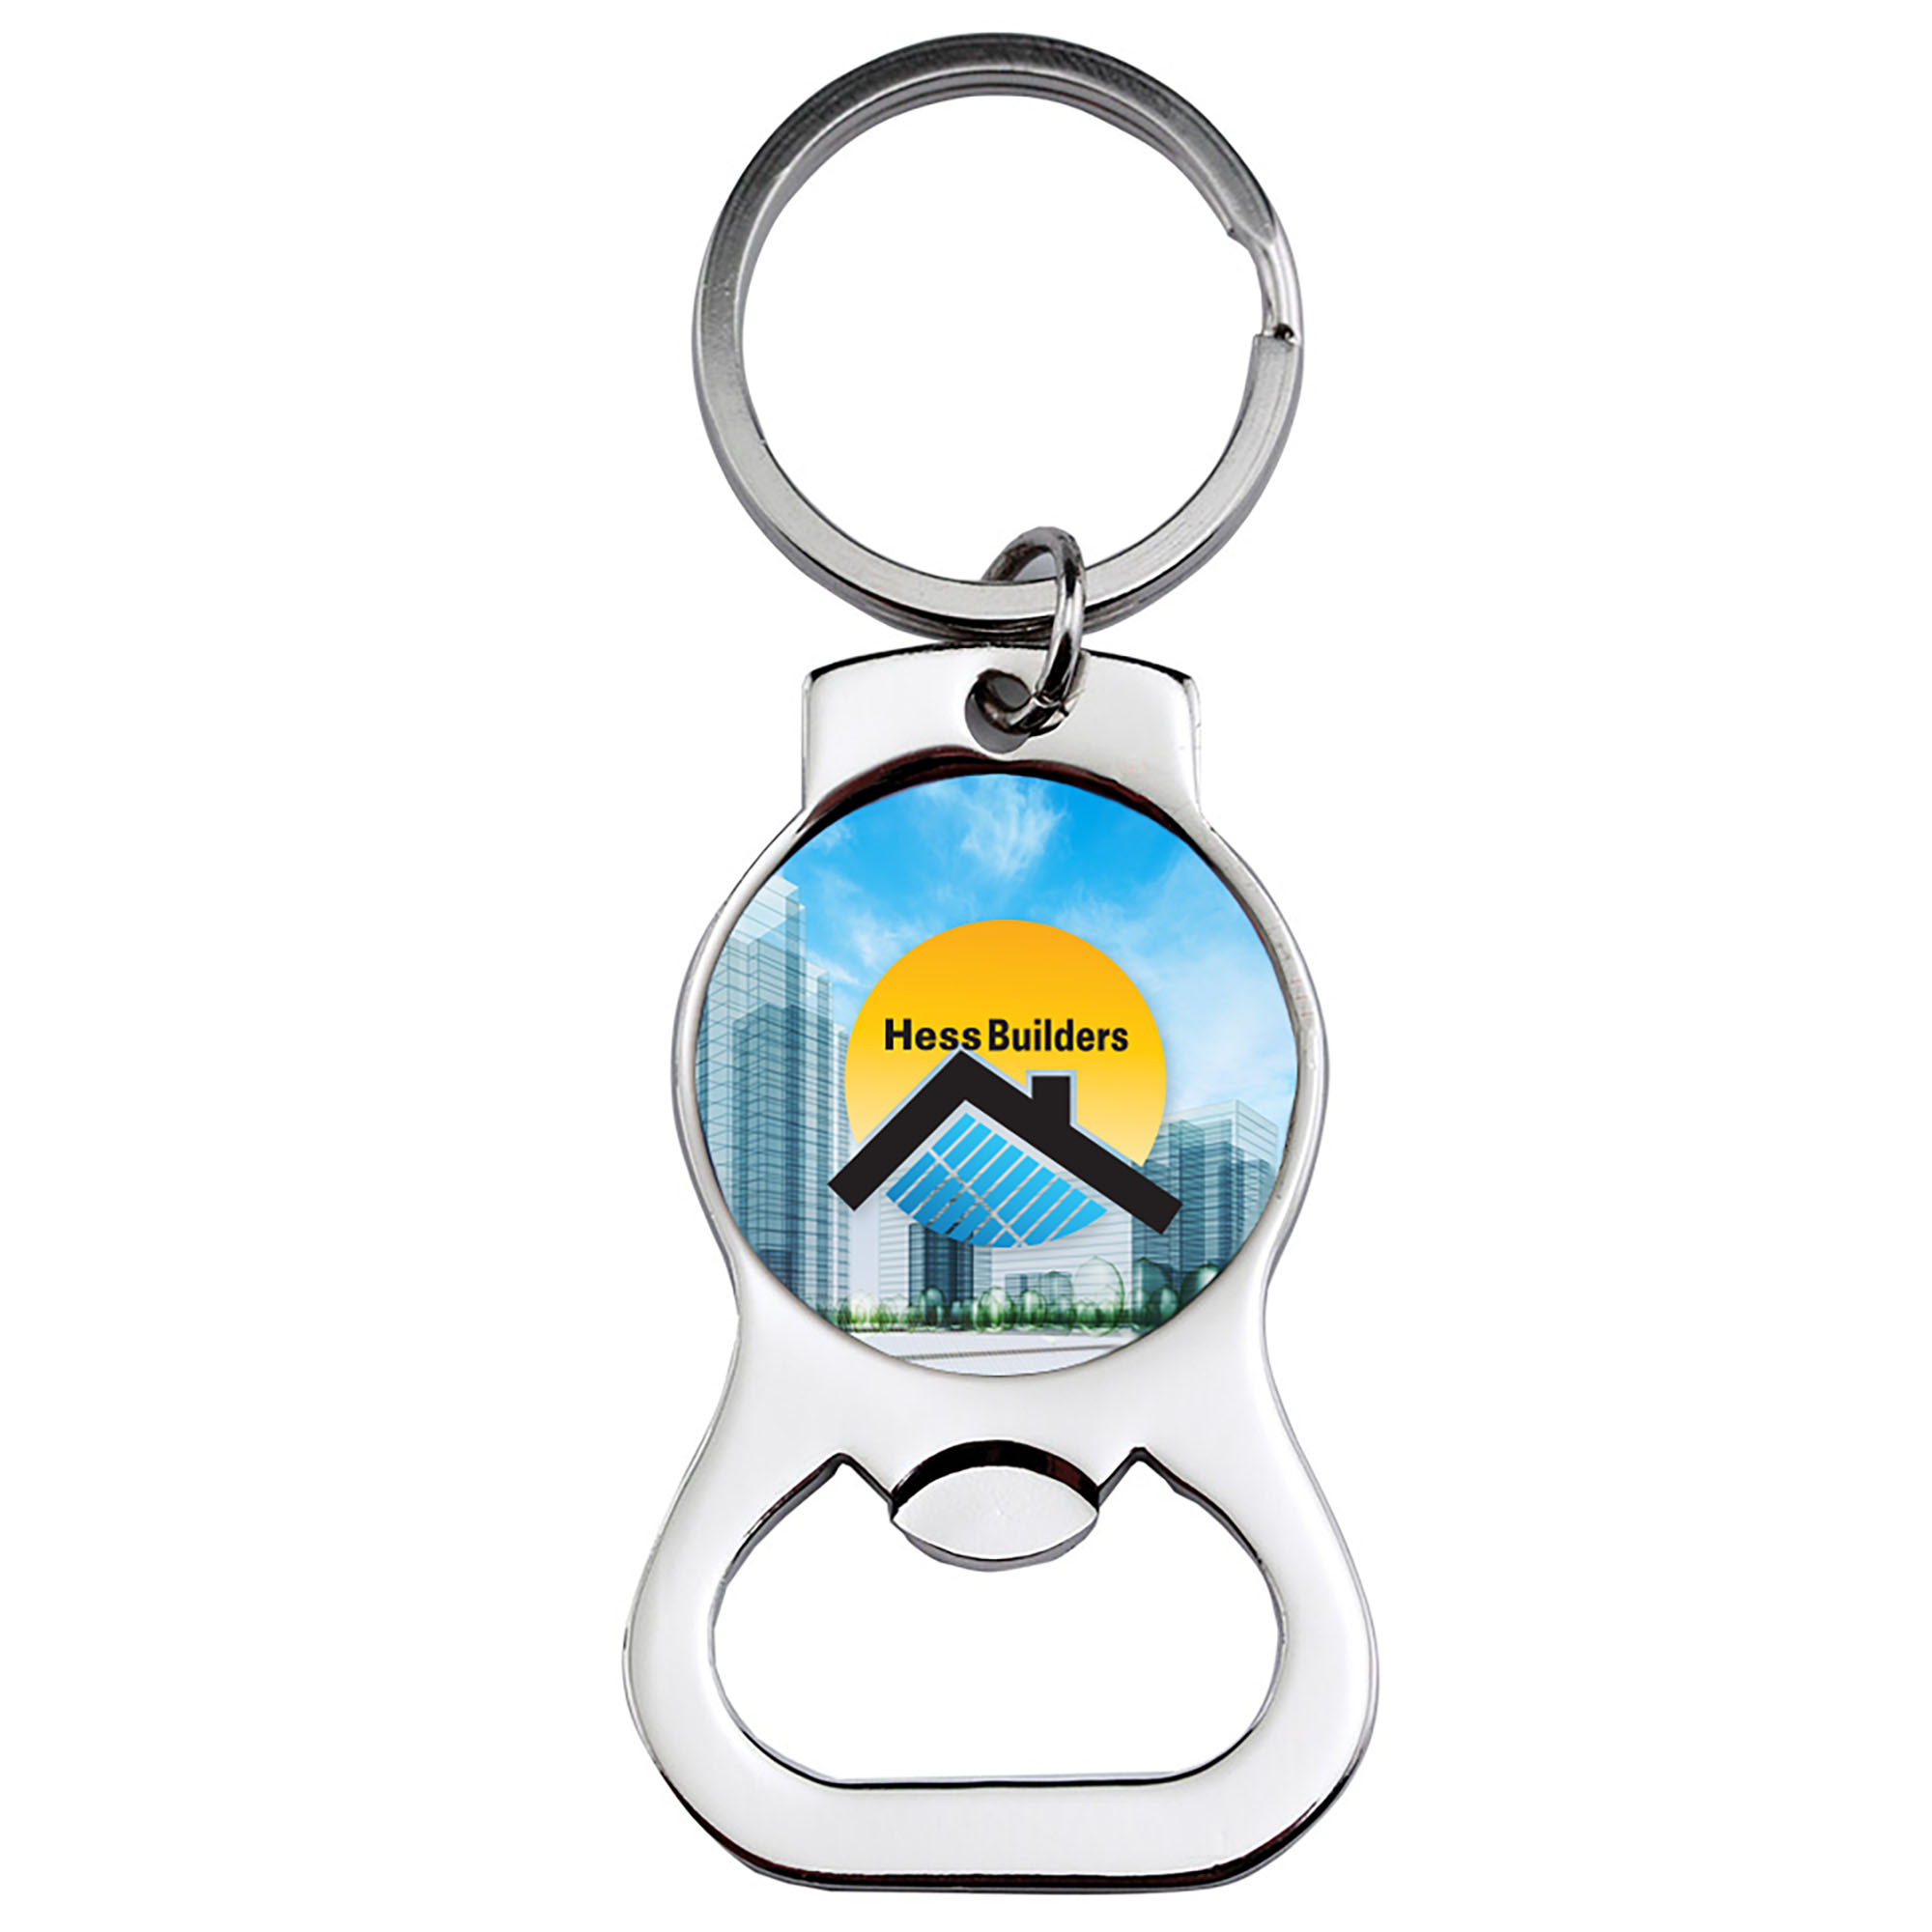 2005 West Virginia State Quarter BU Unc Coin Key Chain Ring Bottle Opener NEW 